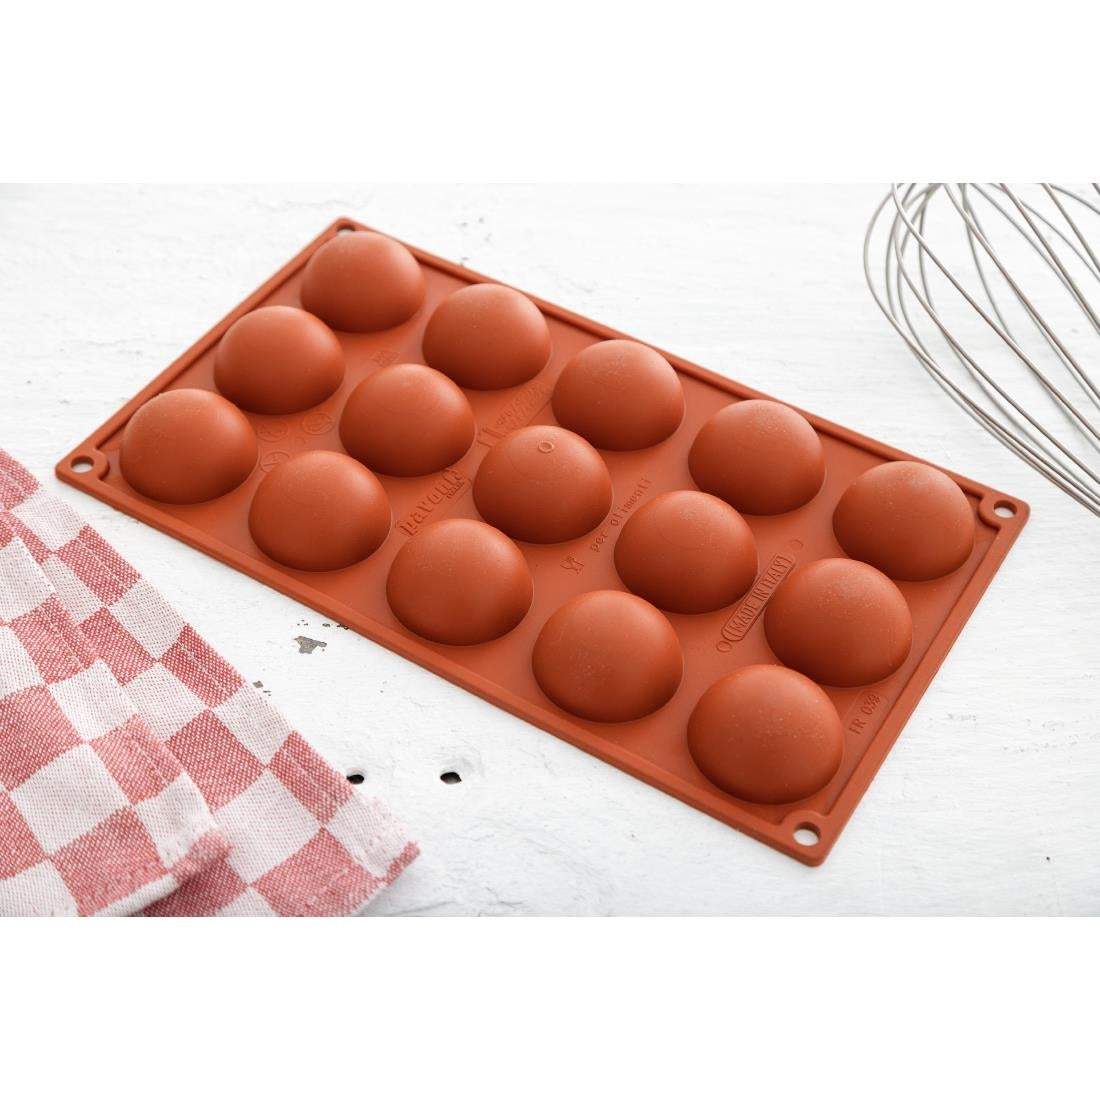 N936 Pavoni Formaflex Silicone Half Sphere Mould 15 Cup